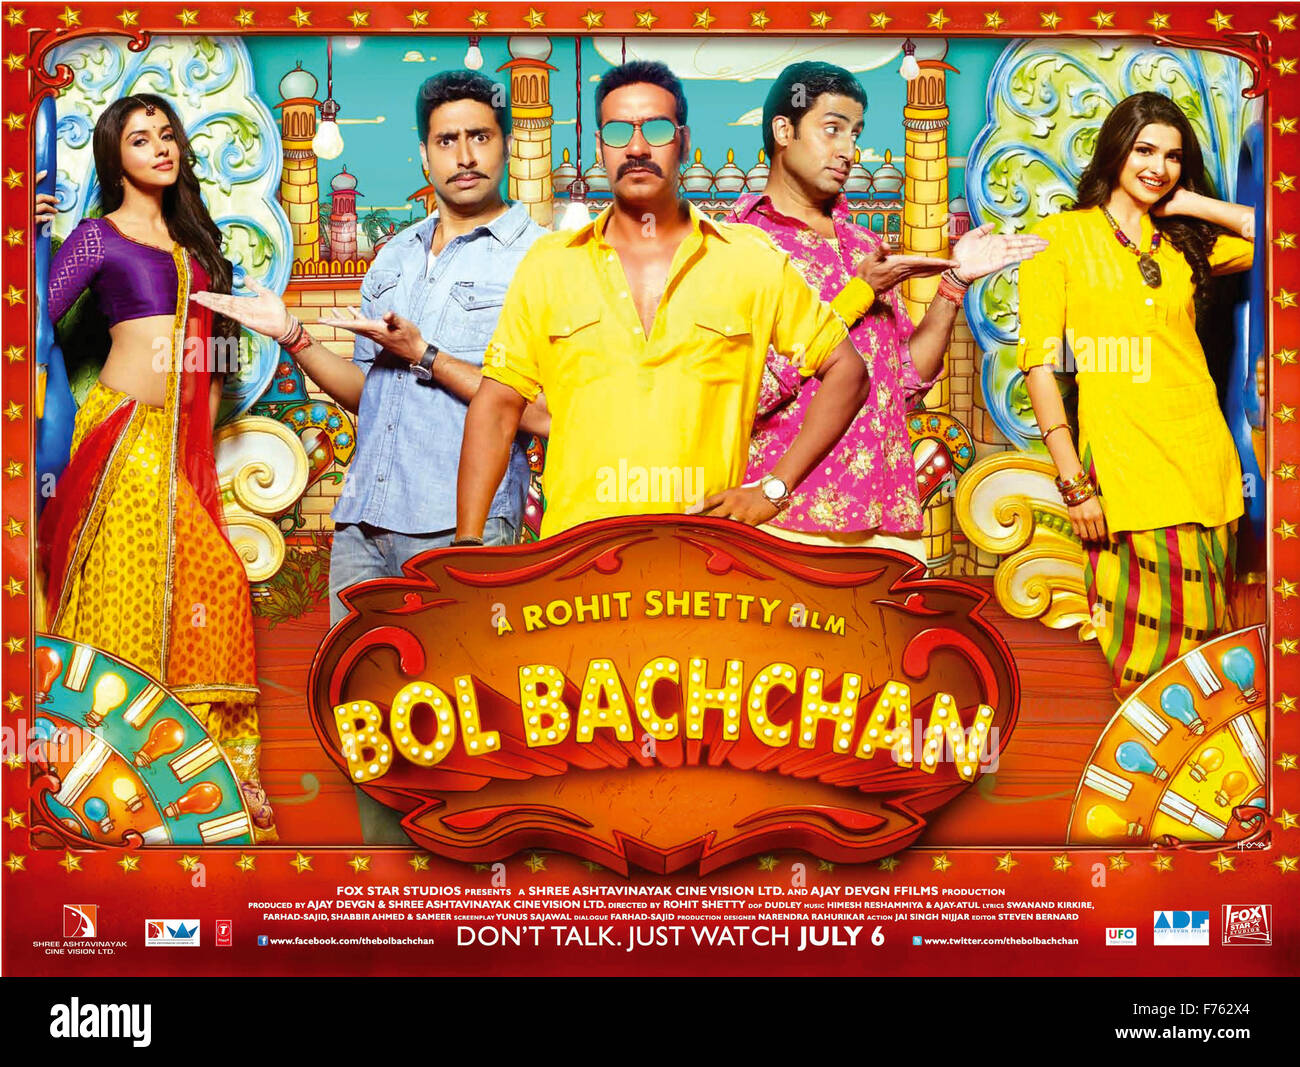 Indian bollywood Hindi film movie poster of Bol Bachchan a Rohit Shetty film India Stock Photo